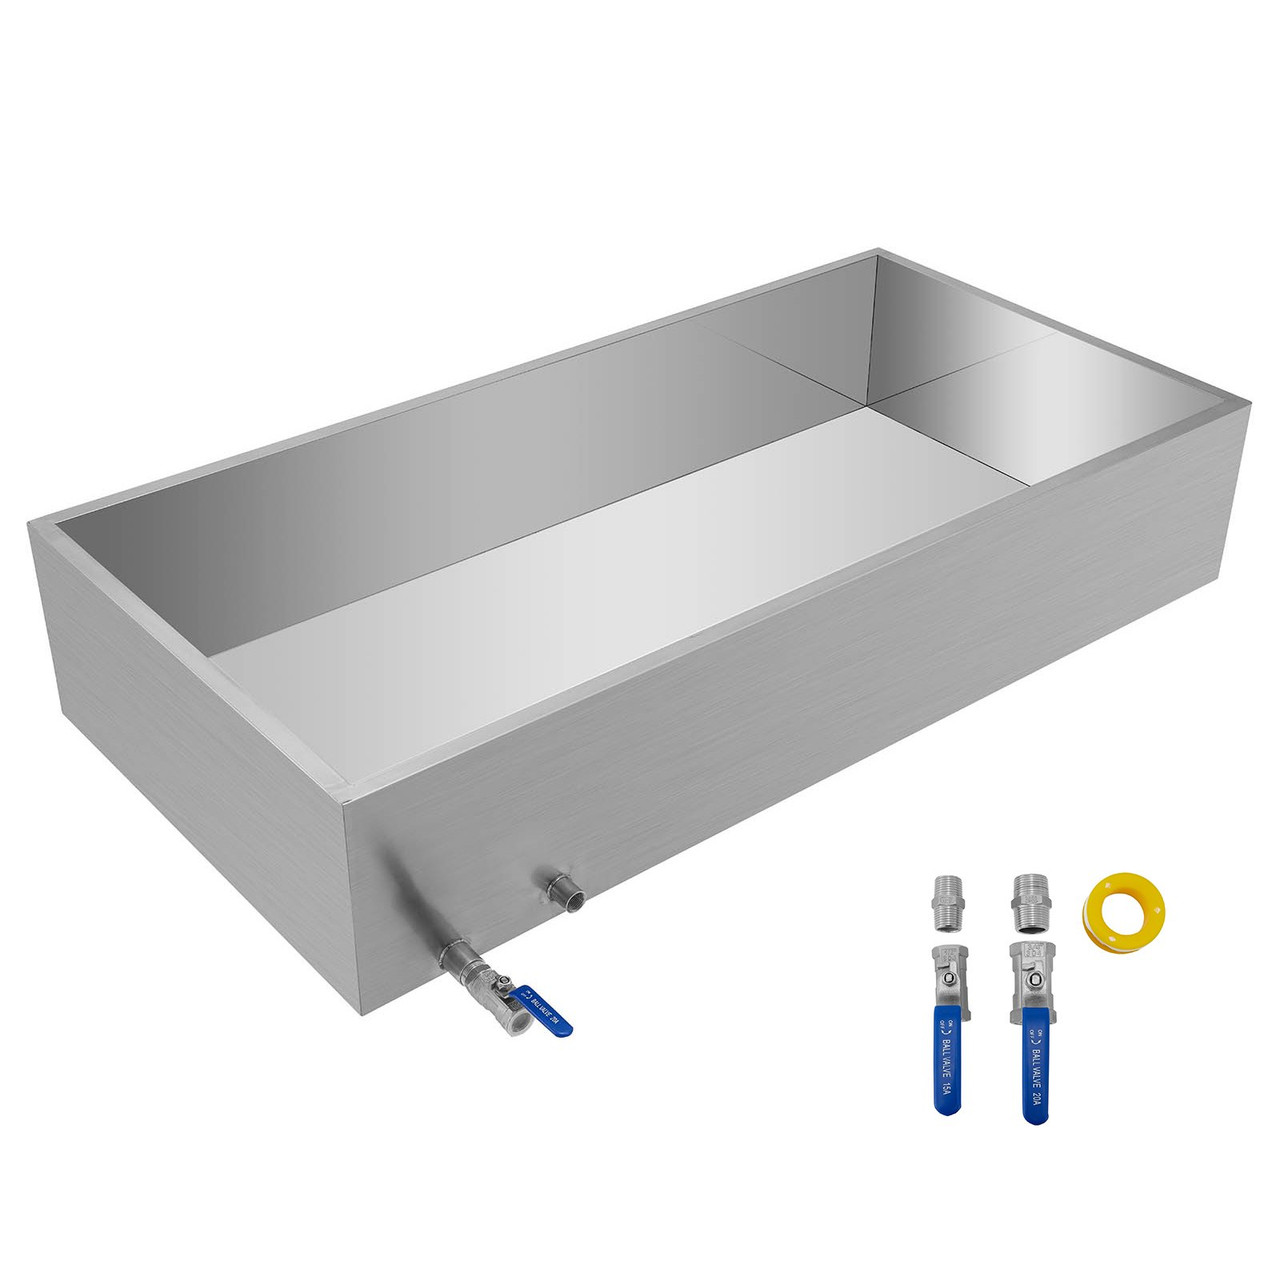 Maple Syrup Evaporator Pan 48x24x9.5 Inch Stainless Steel Maple Syrup Boiling Pan with Valve for Boiling Maple Syrup